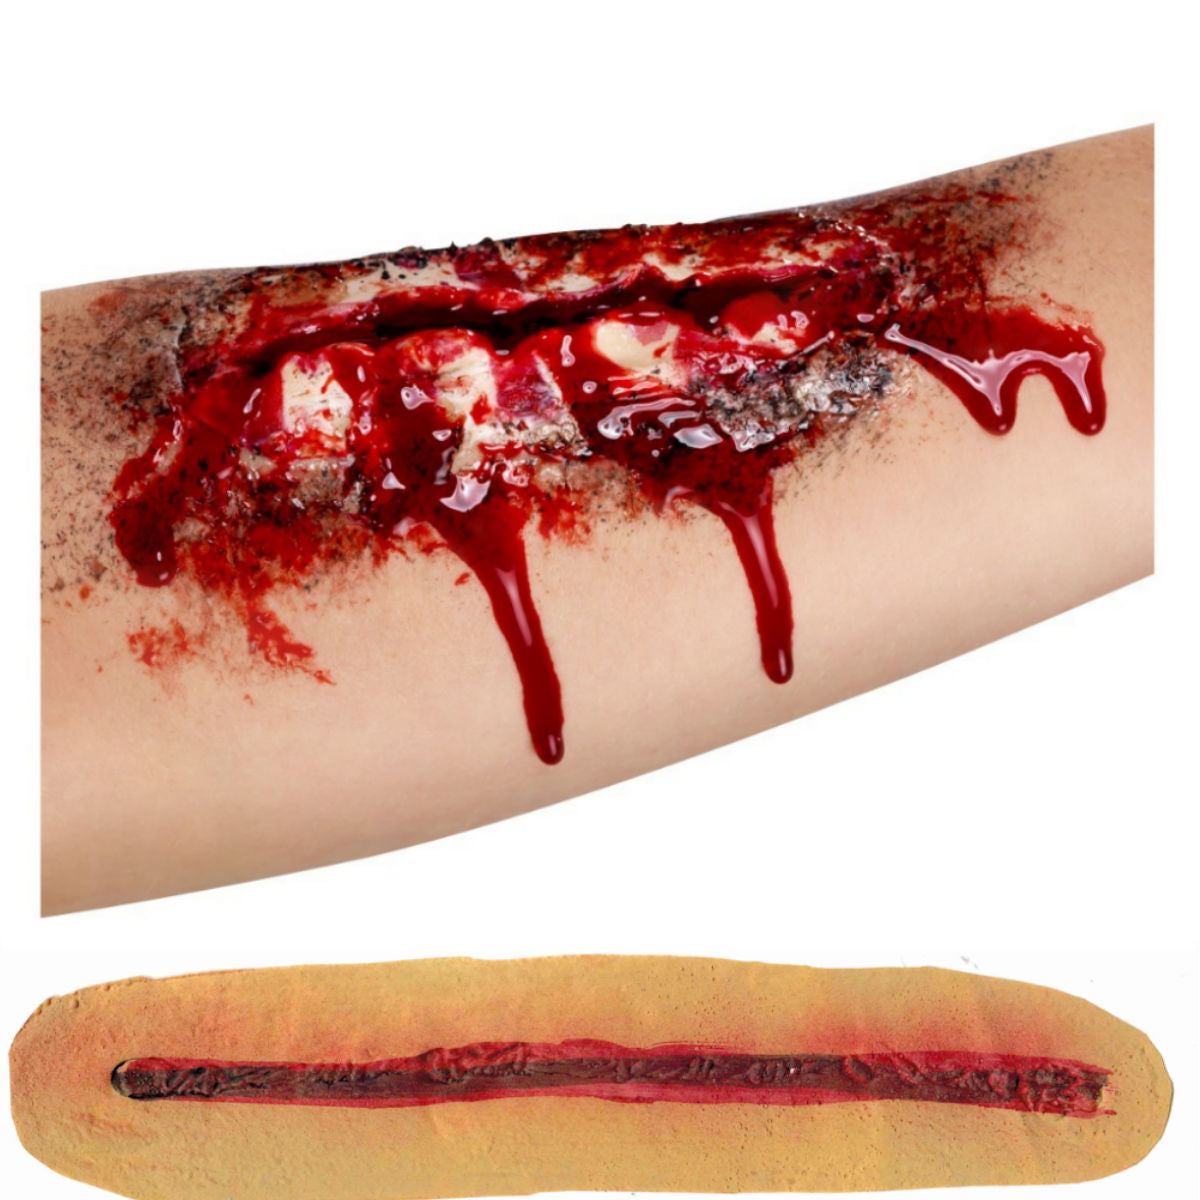 Open Wound Scar Latex Make-Up Zombie Halloween FX Large 25cm long